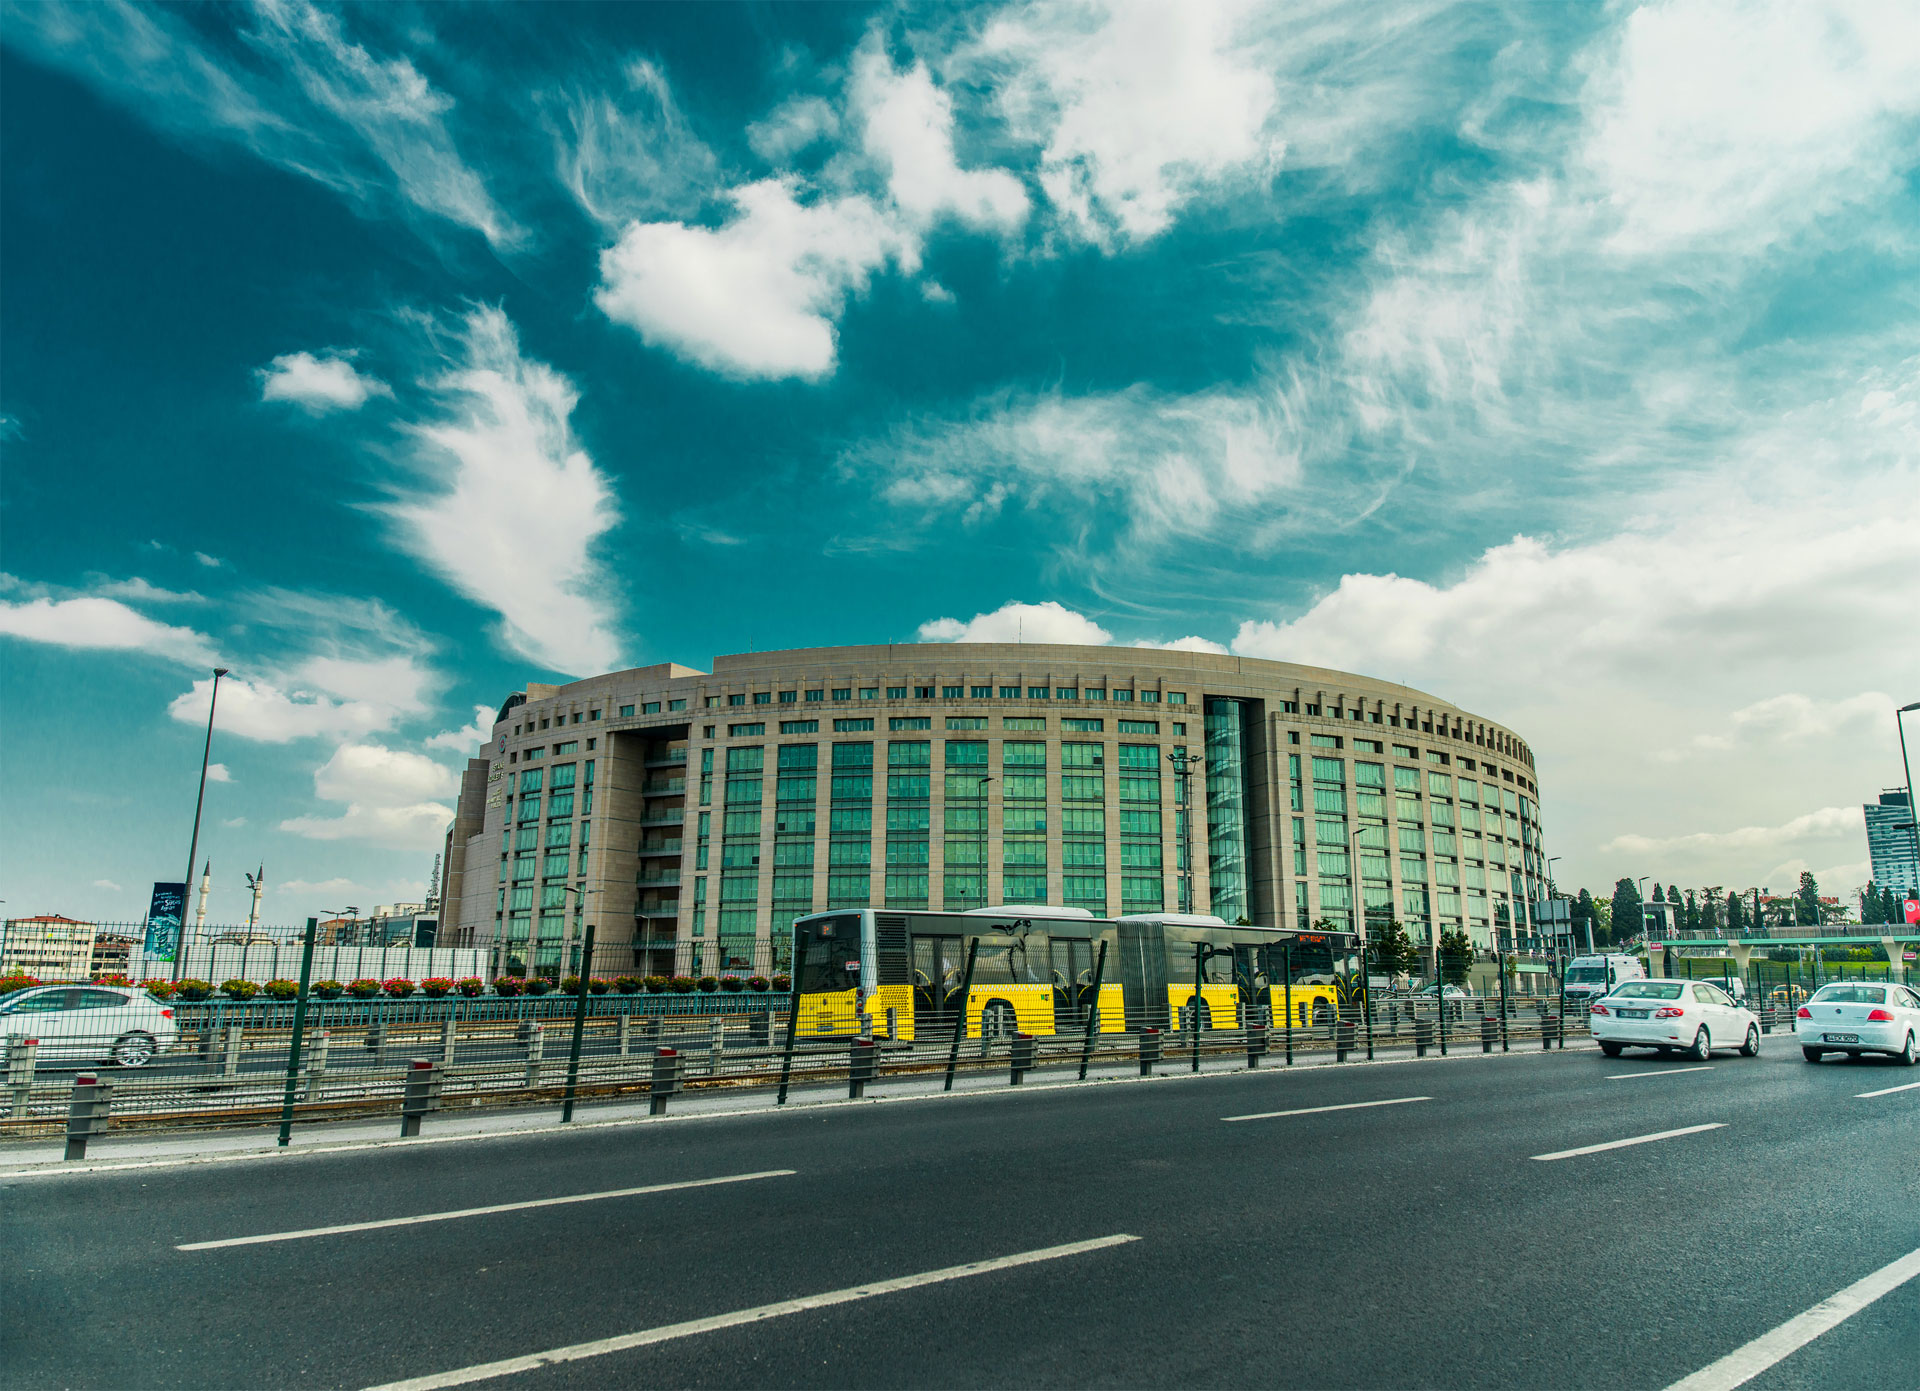 A modern circular building with a yellow tram passing by under a cloudy sky